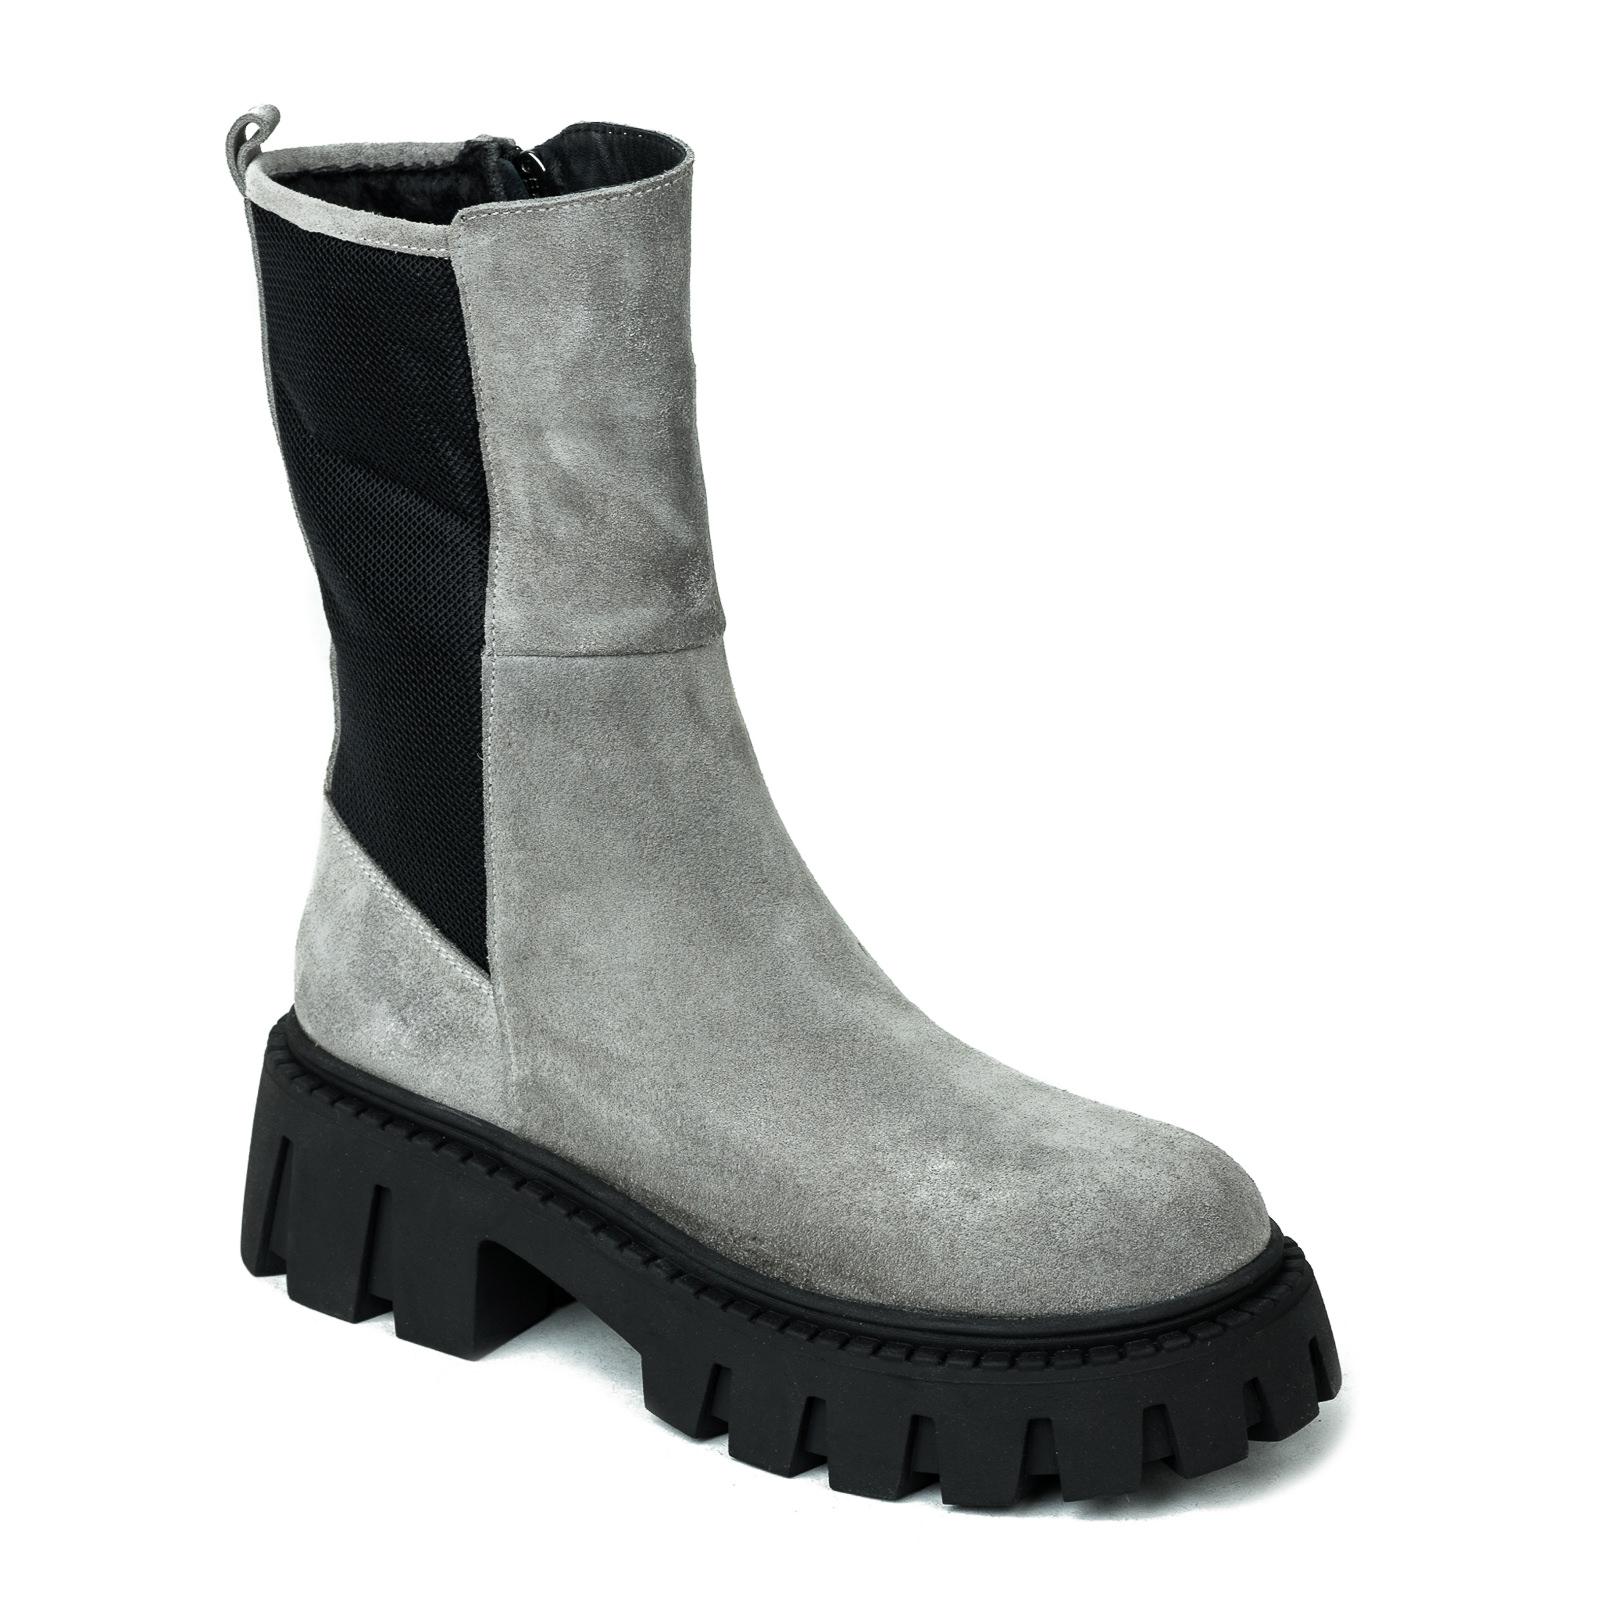 Leather booties B247 - GREY